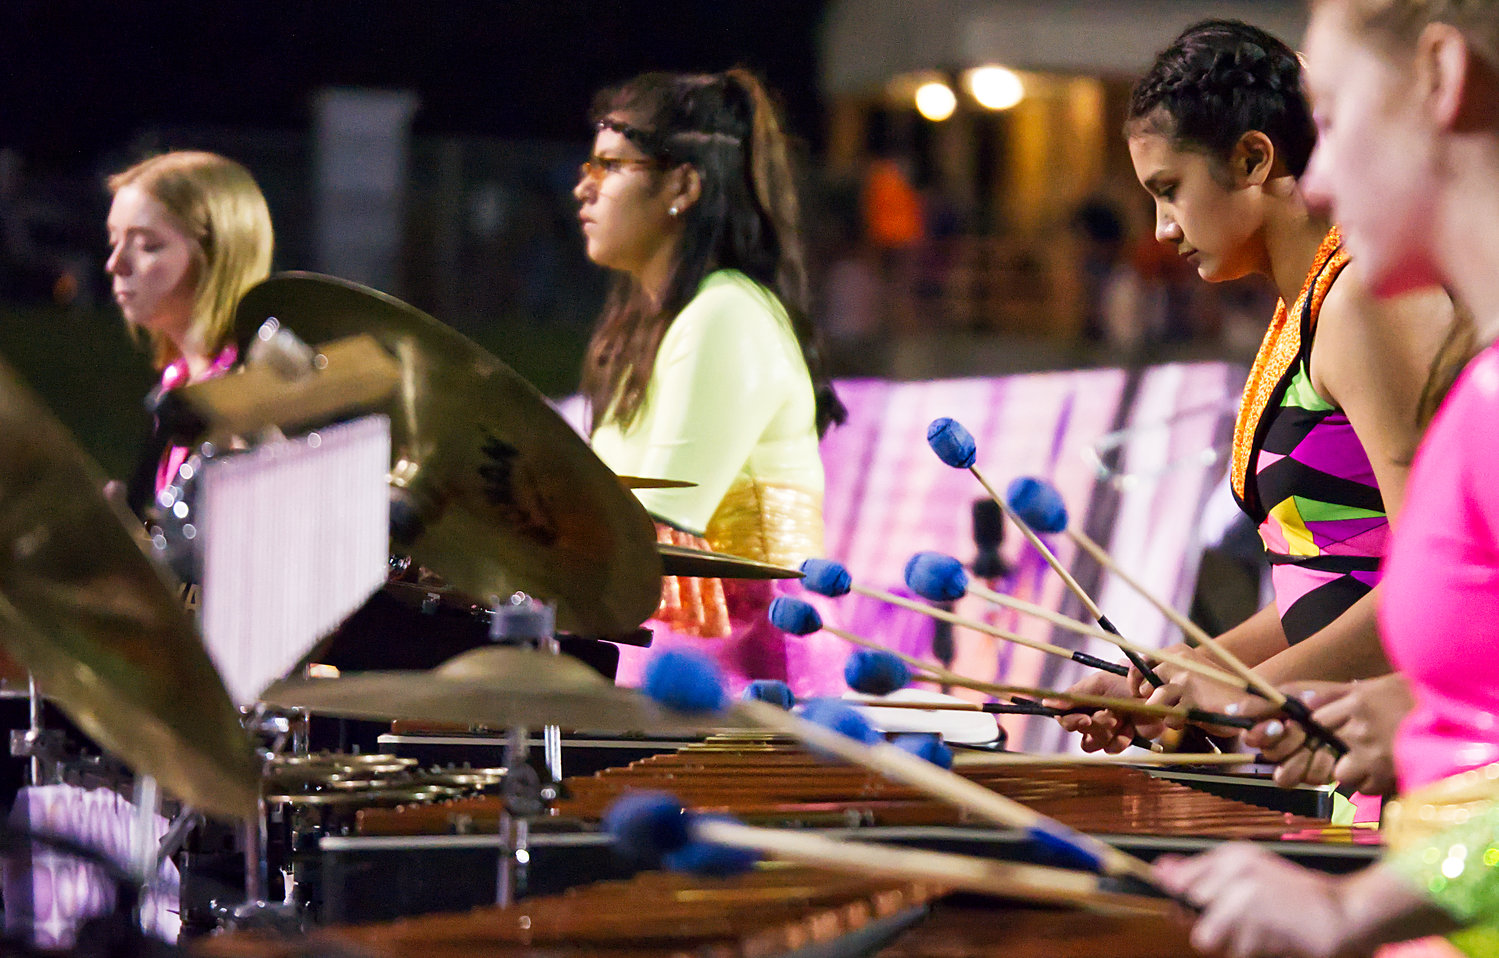 Mallet players for the Sound of the Swarm Mineola High School marching band, part of the percussion “pit” keep the beat during the disco-themed halftime show.